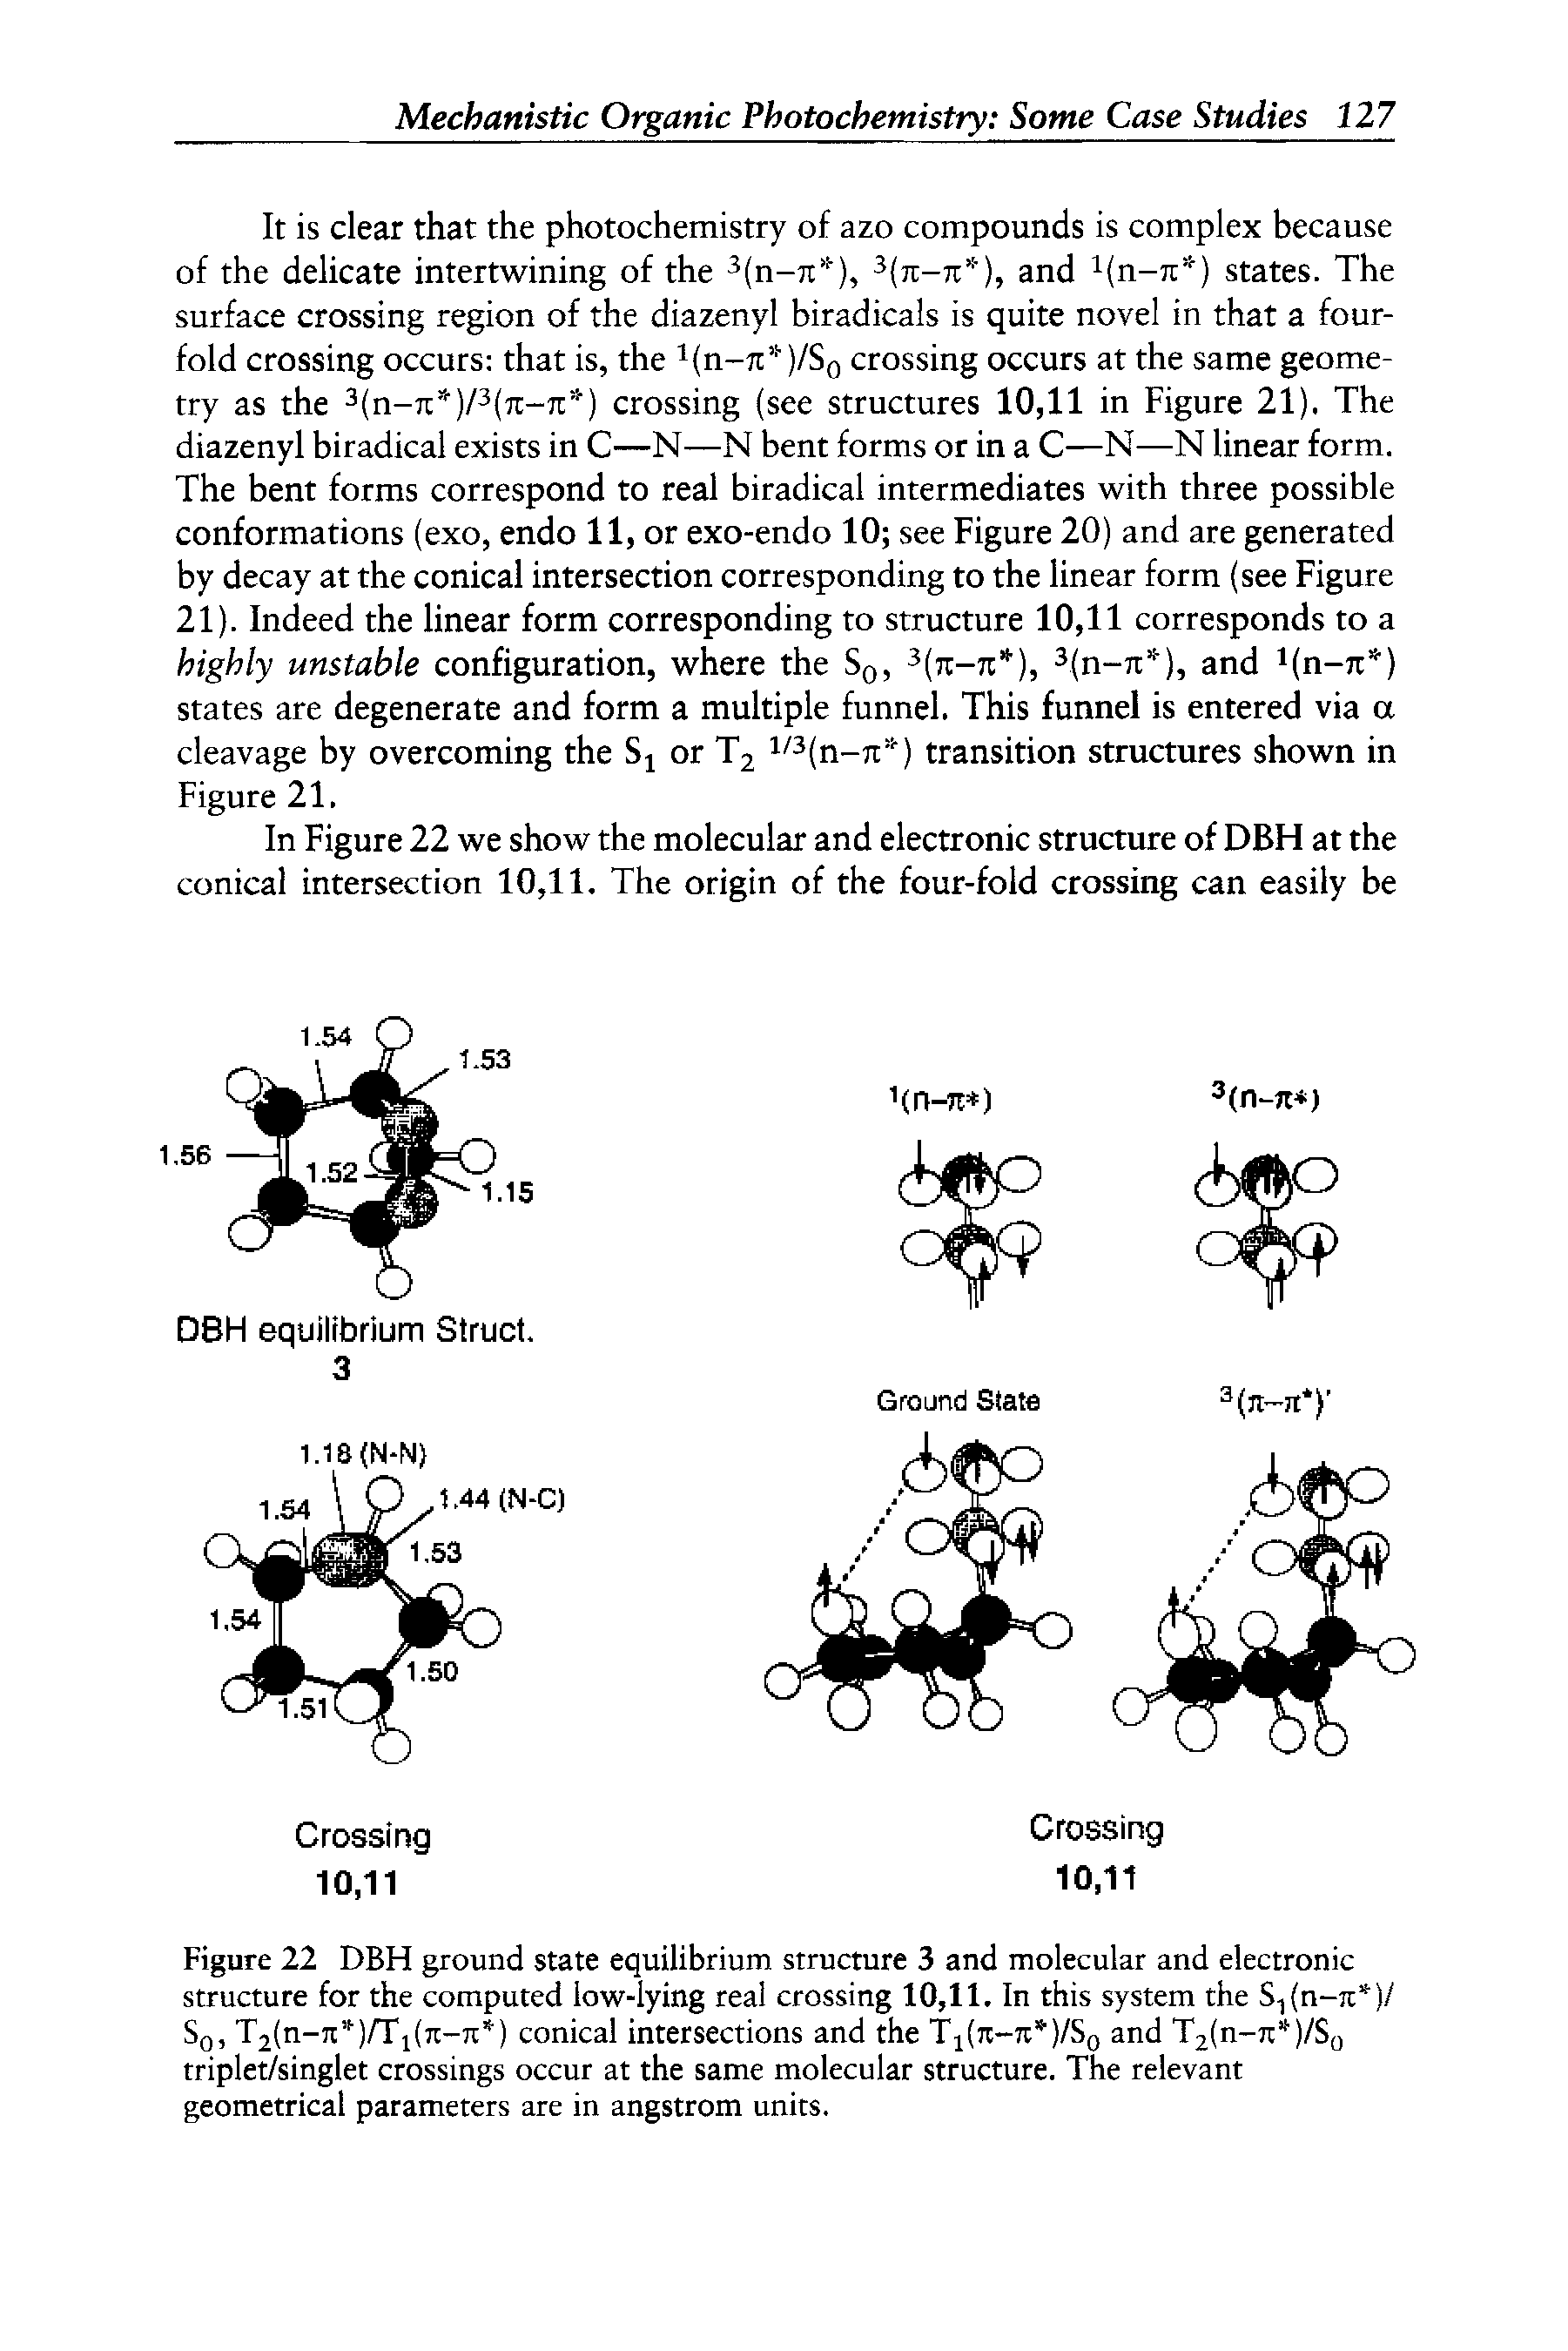 Figure 22 DBH ground state equilibrium structure 3 and molecular and electronic structure for the computed low-lying real crossing 10,11. In this system the S1(n-ic )/ S0, T2(n-7ill )/T1(rc-7i 1 ) conical intersections and the T1(Tt-7t ,)/S0 and T2(n-7i,l )/S0 triplet/singlet crossings occur at the same molecular structure. The relevant geometrical parameters are in angstrom units.